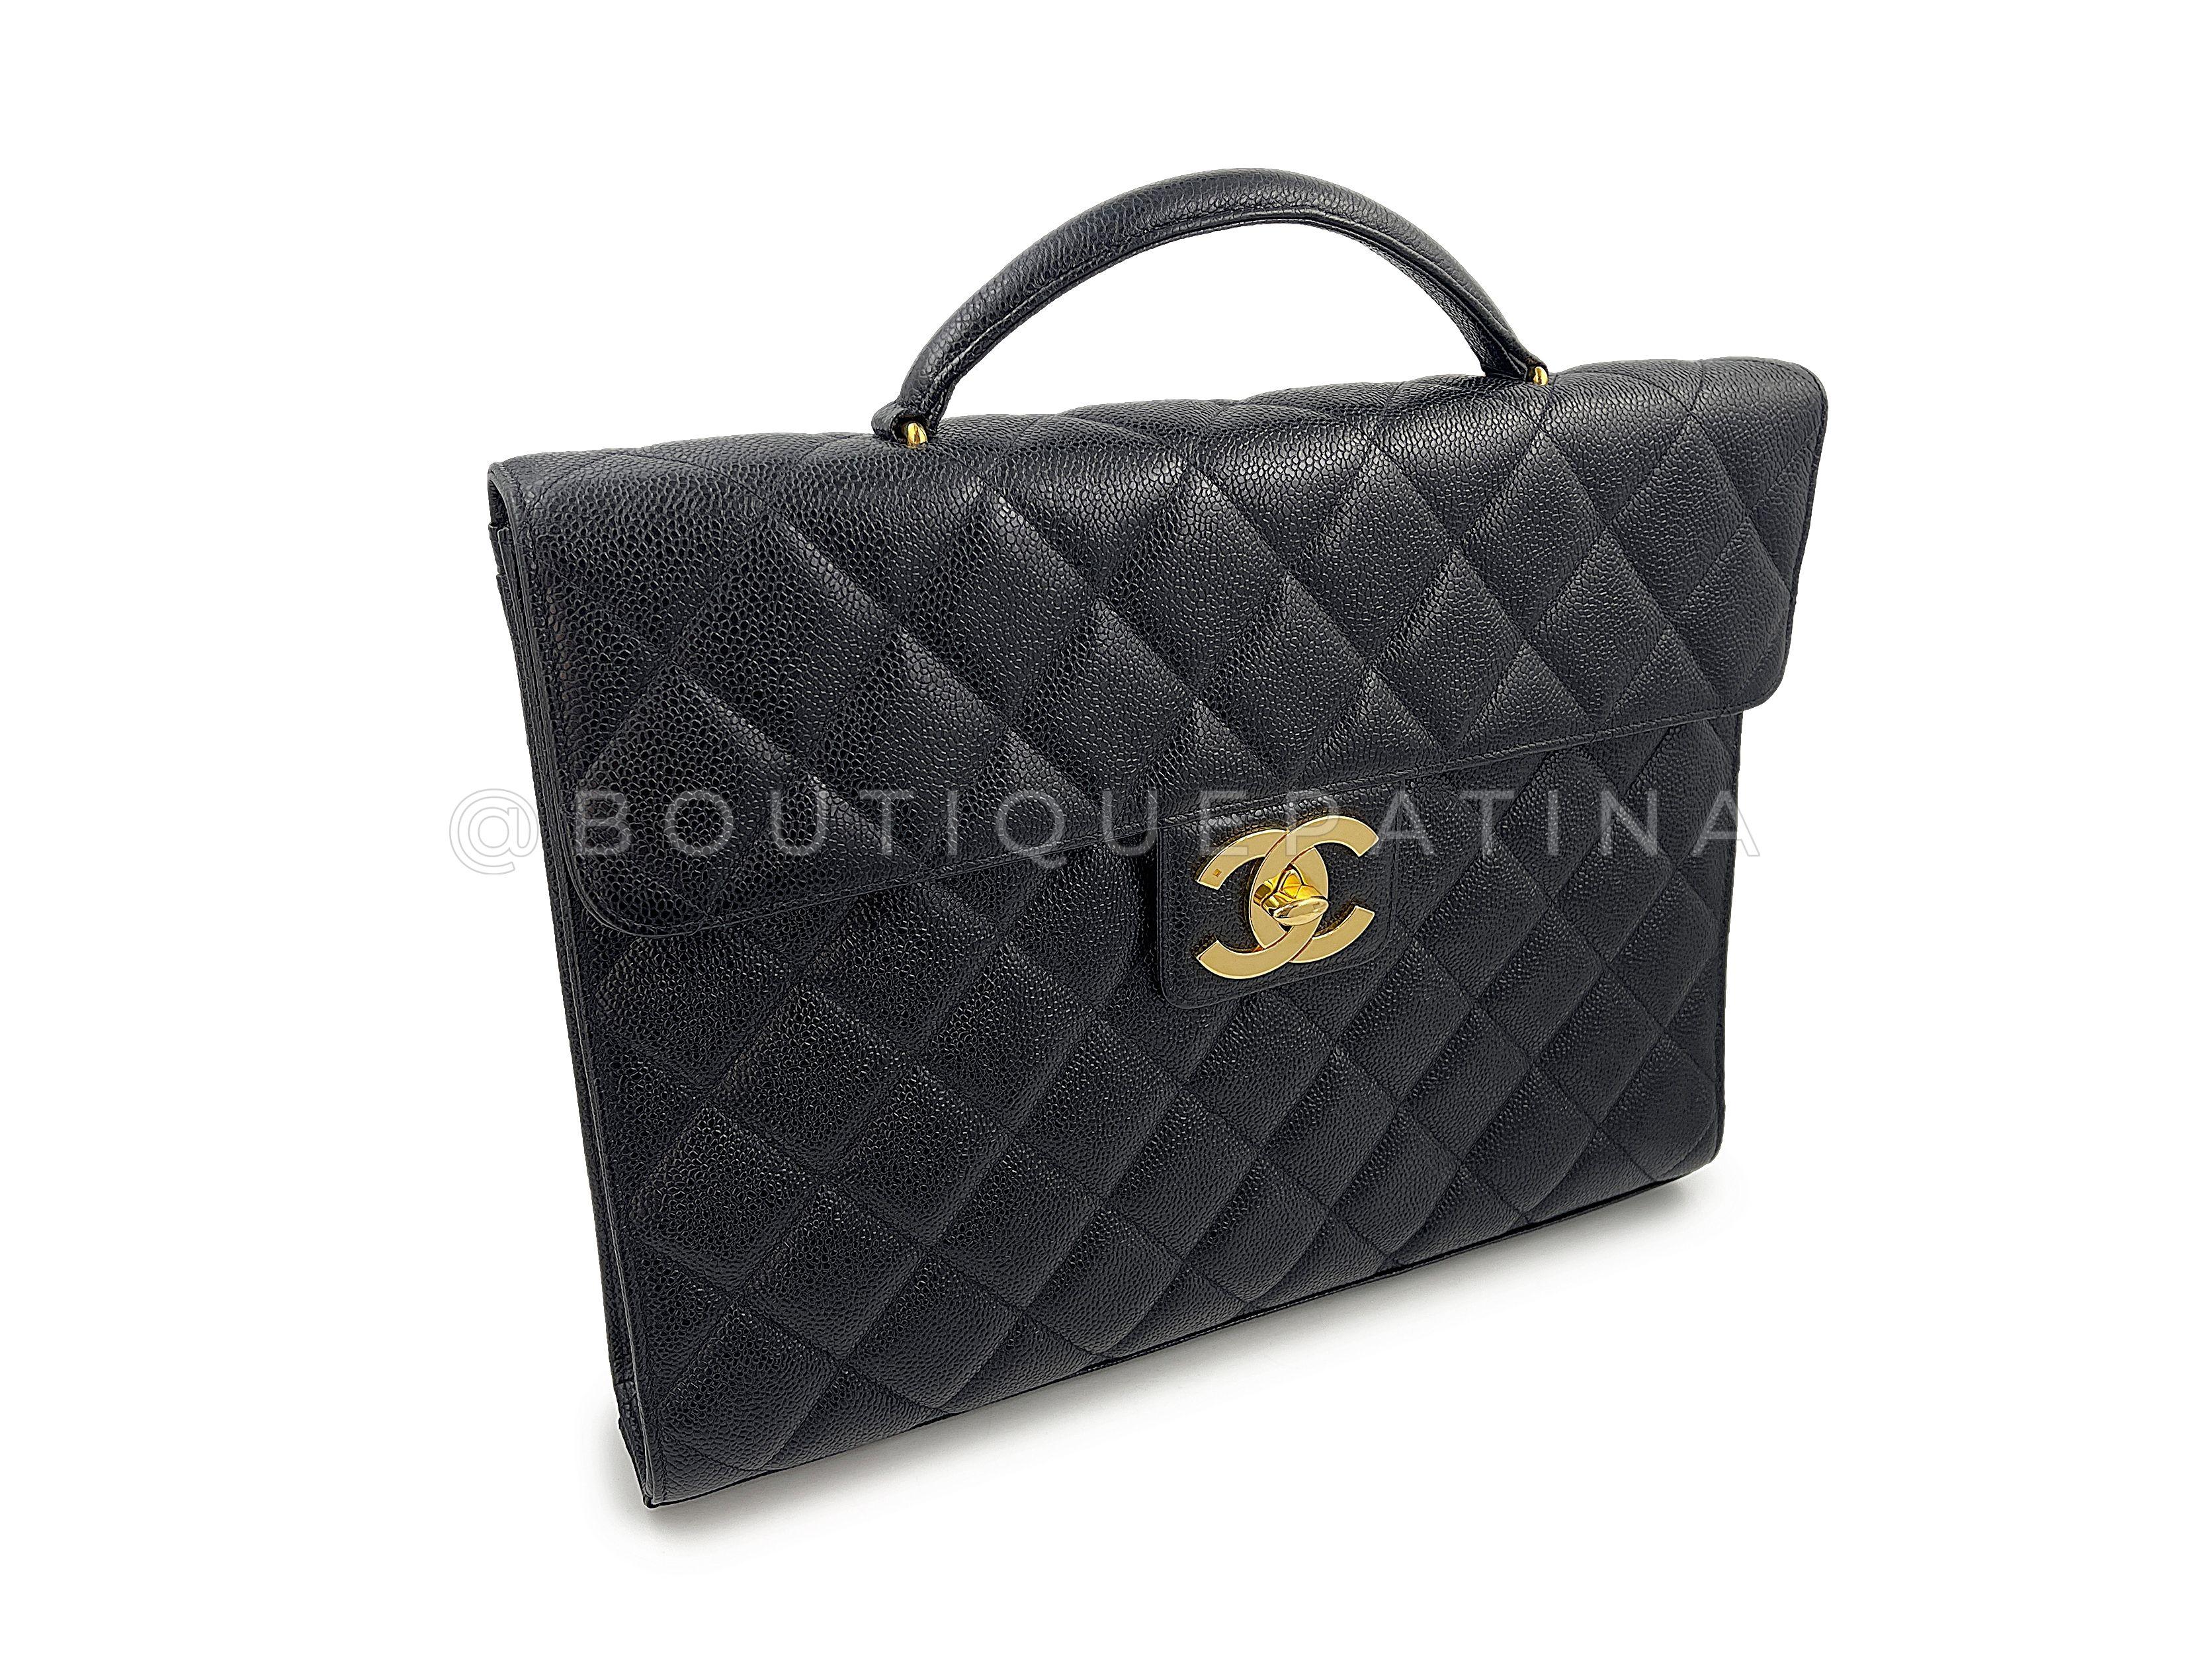 Store item: 67916
Vintage caviar bags are extremely hard to find -- usually vintage Chanel bags are in lambskin. The combination of the pebbled calfskin with the 24k gold plated hardware is a holy grail for many Chanel enthusiasts.

This is a